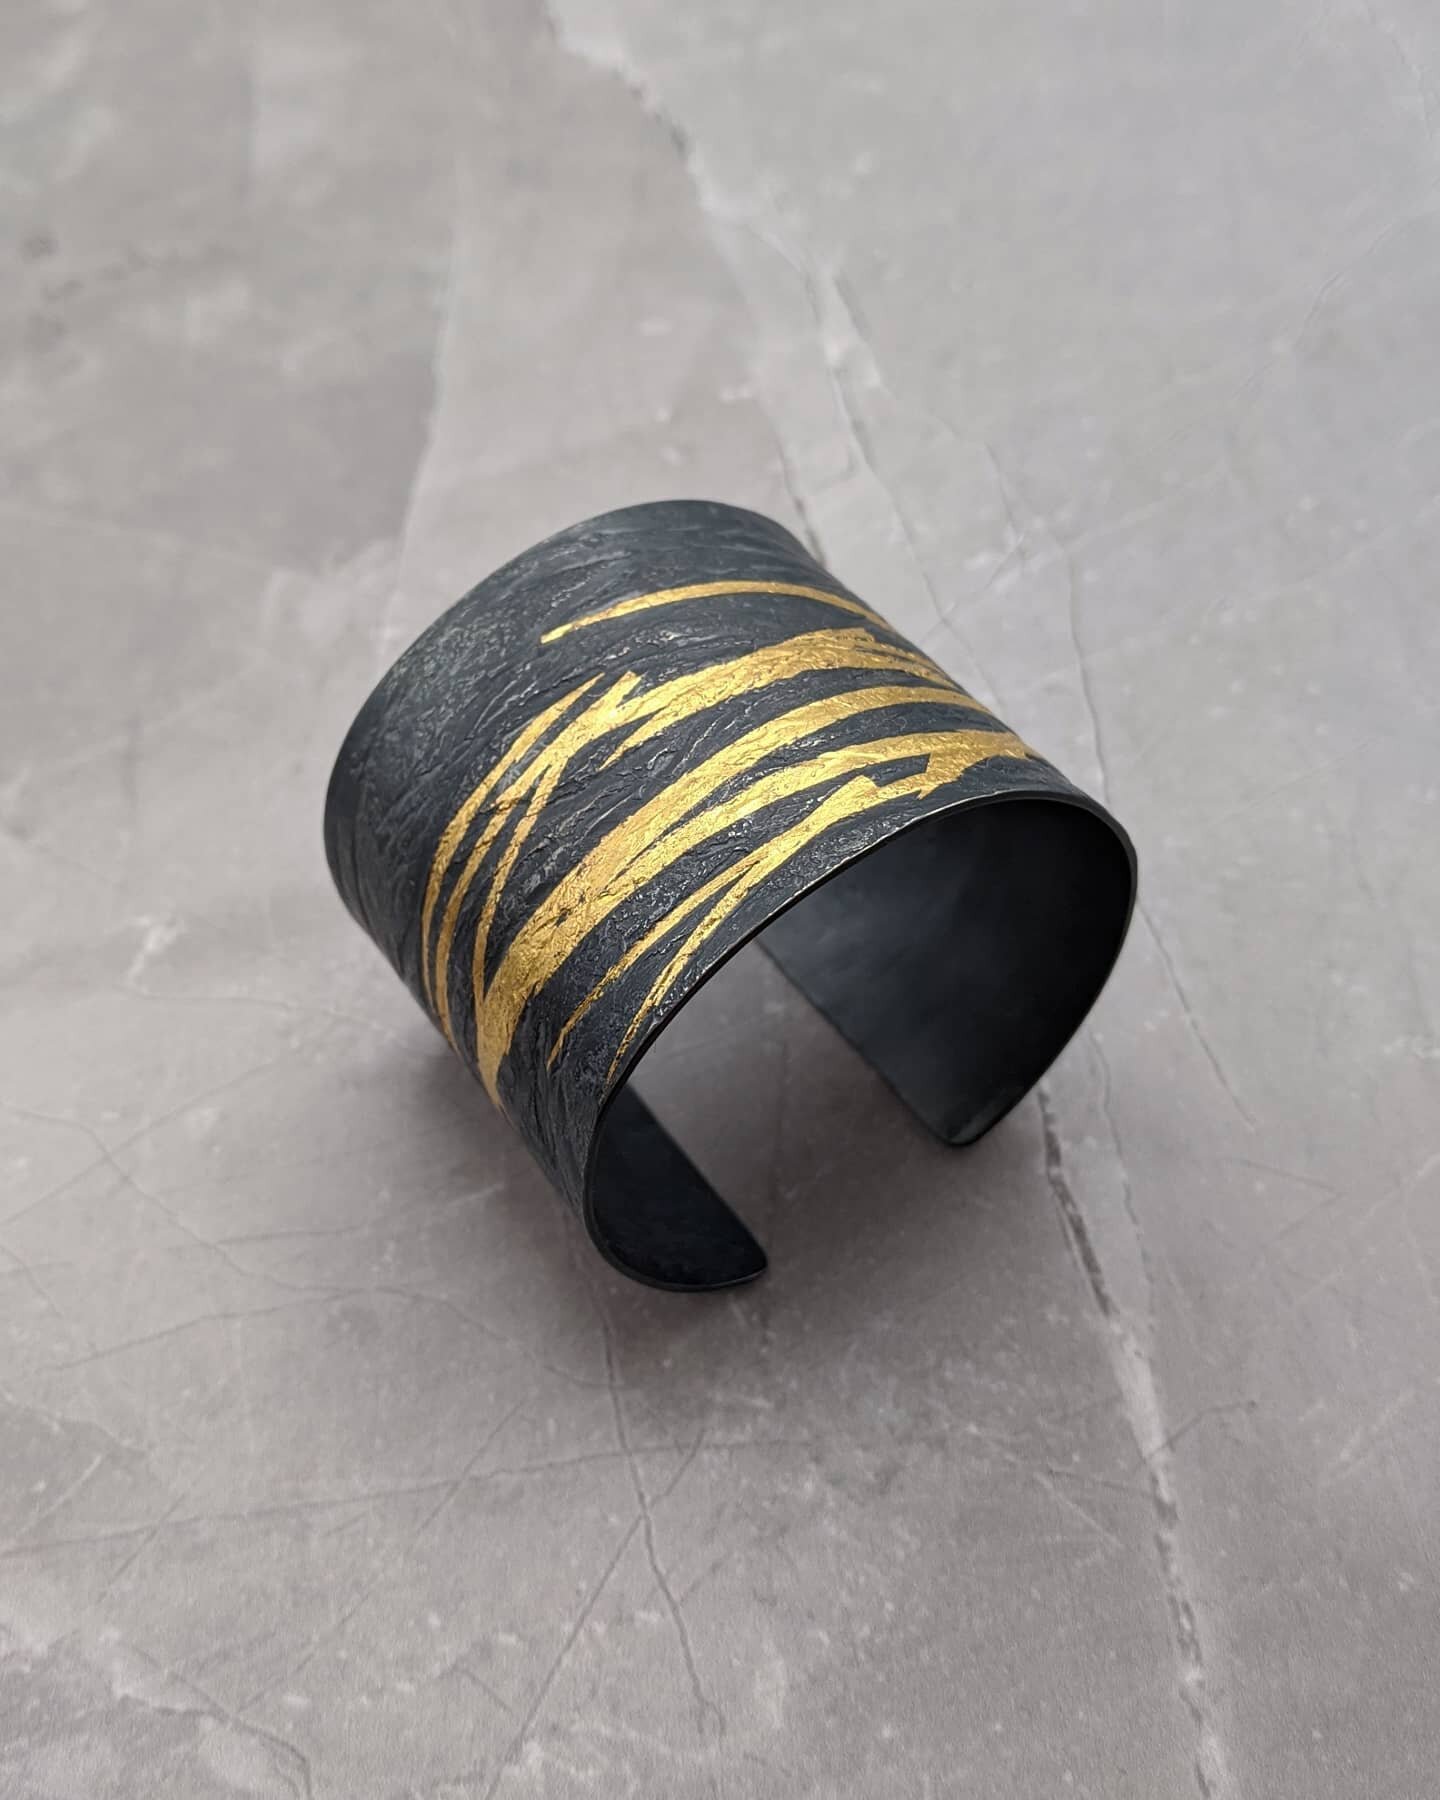 It's the last day of Goldsmiths' Fair! If you'd still like to have a look, the website is open until 6pm. Link via @goldsmithsfair

Thank you so much to everyone who has ordered, commissioned and enquired about pieces 💛💛💛

Neolith Cuff in oxidised